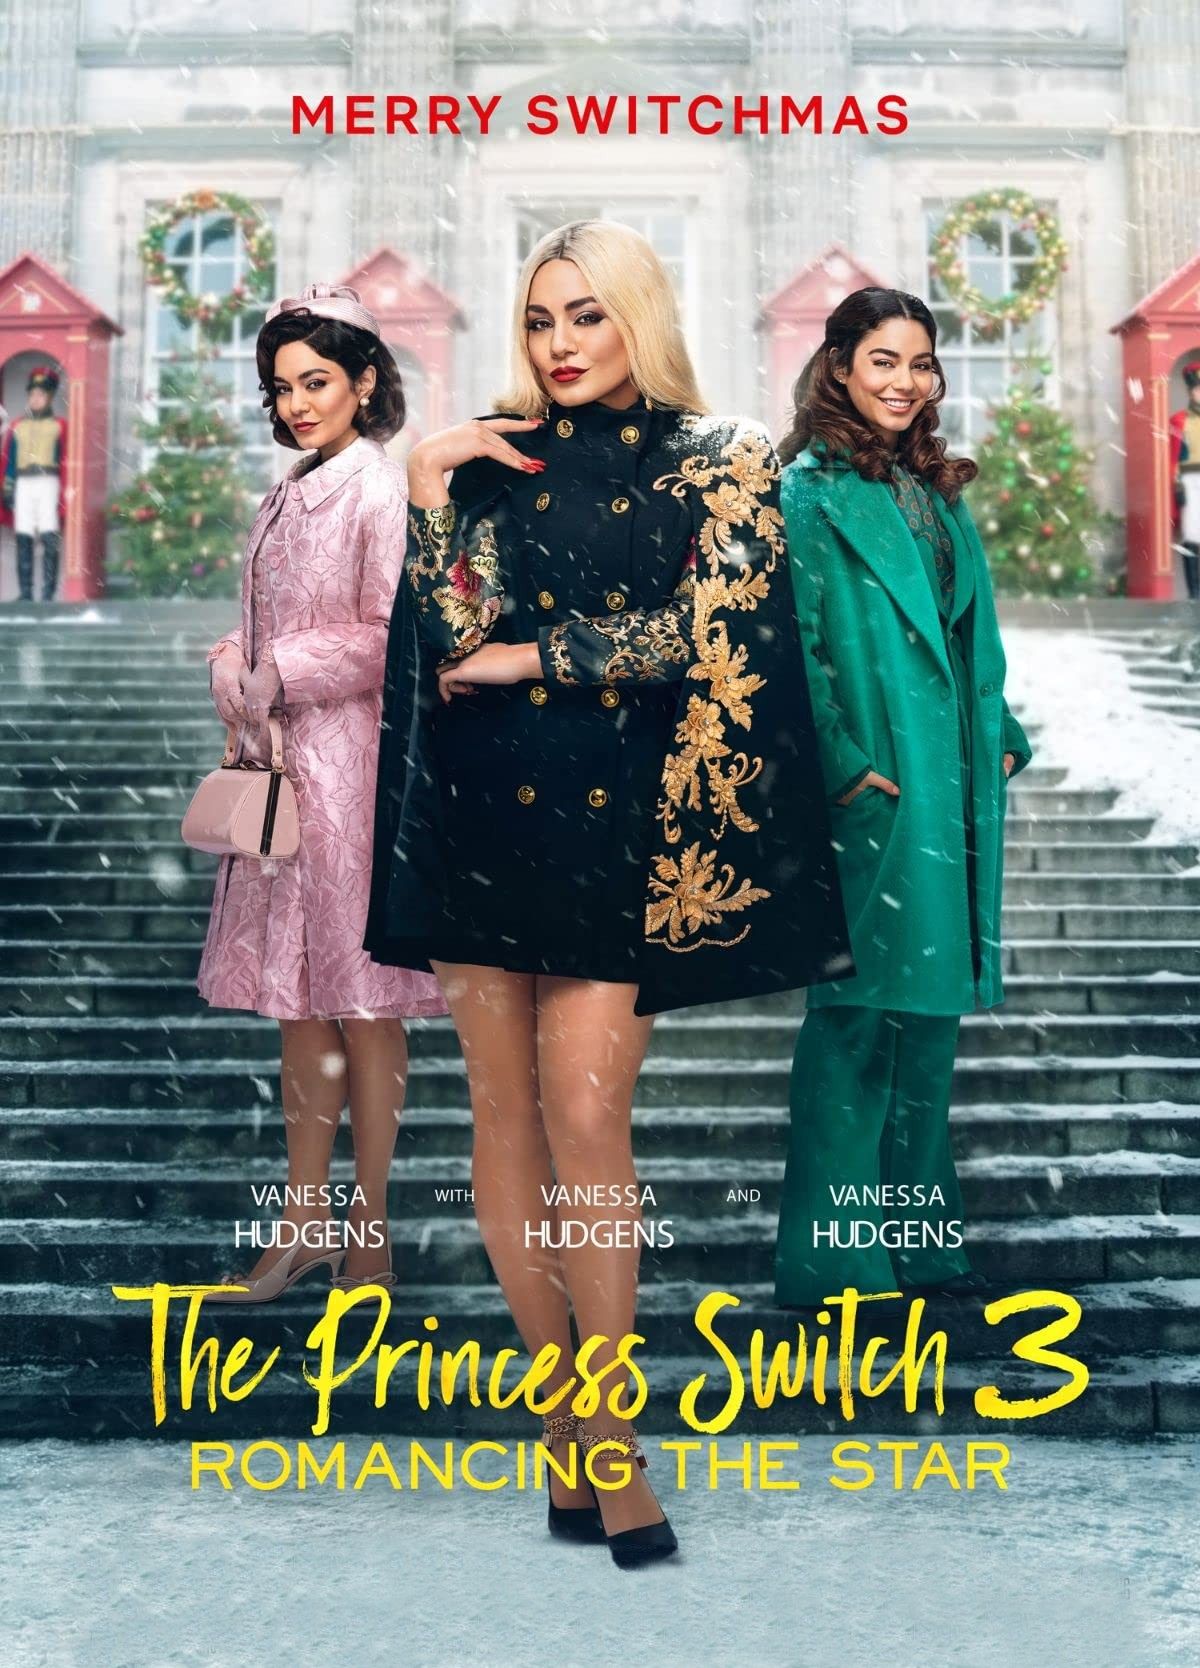 The Princess Switch 3: Romancing the Star (2021) English DVDRip download full movie